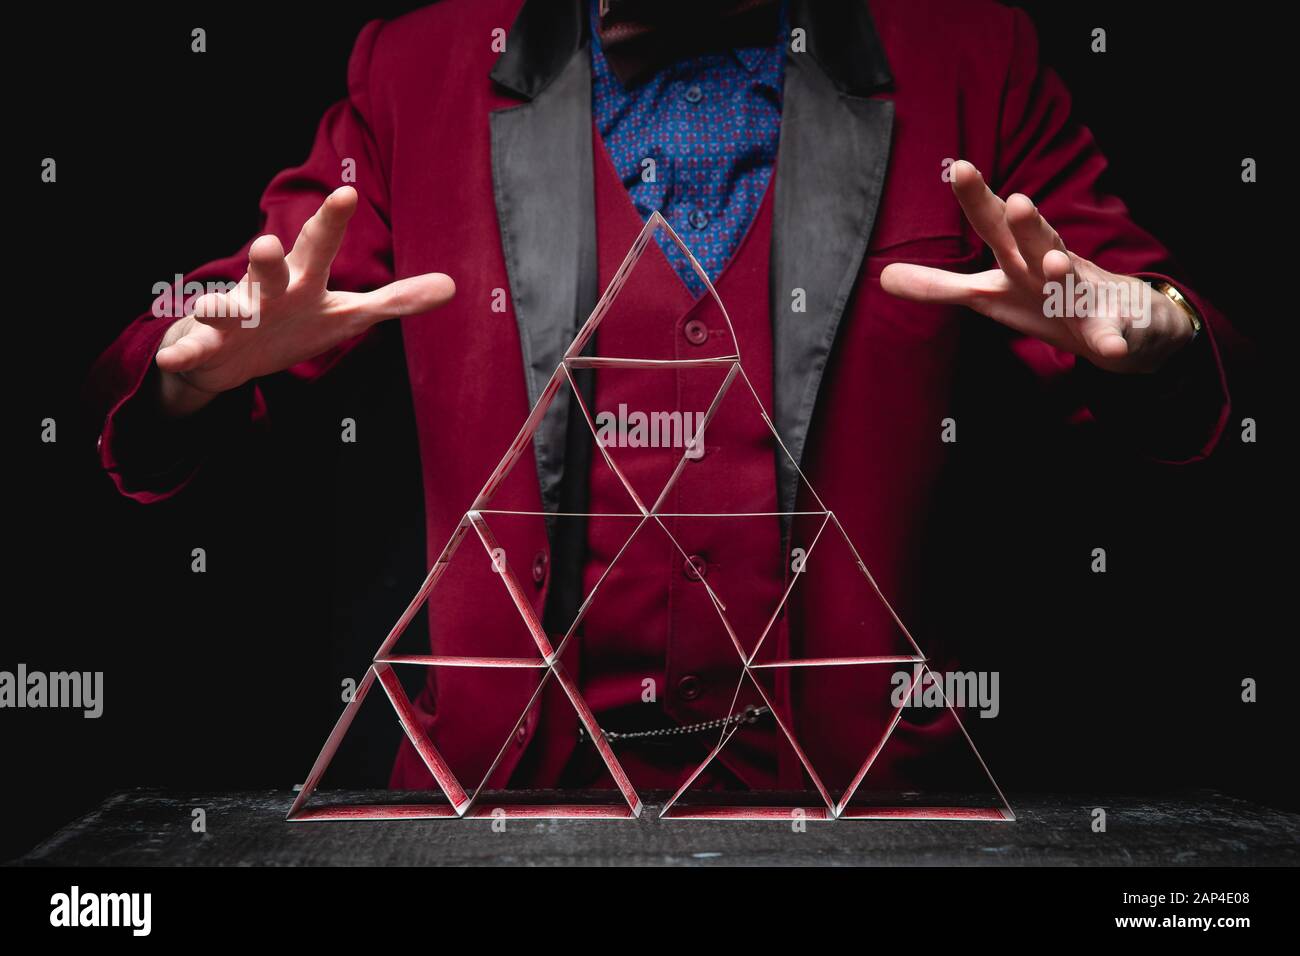 Magician shows trick pyramid with playing cards on dark background Stock Photo